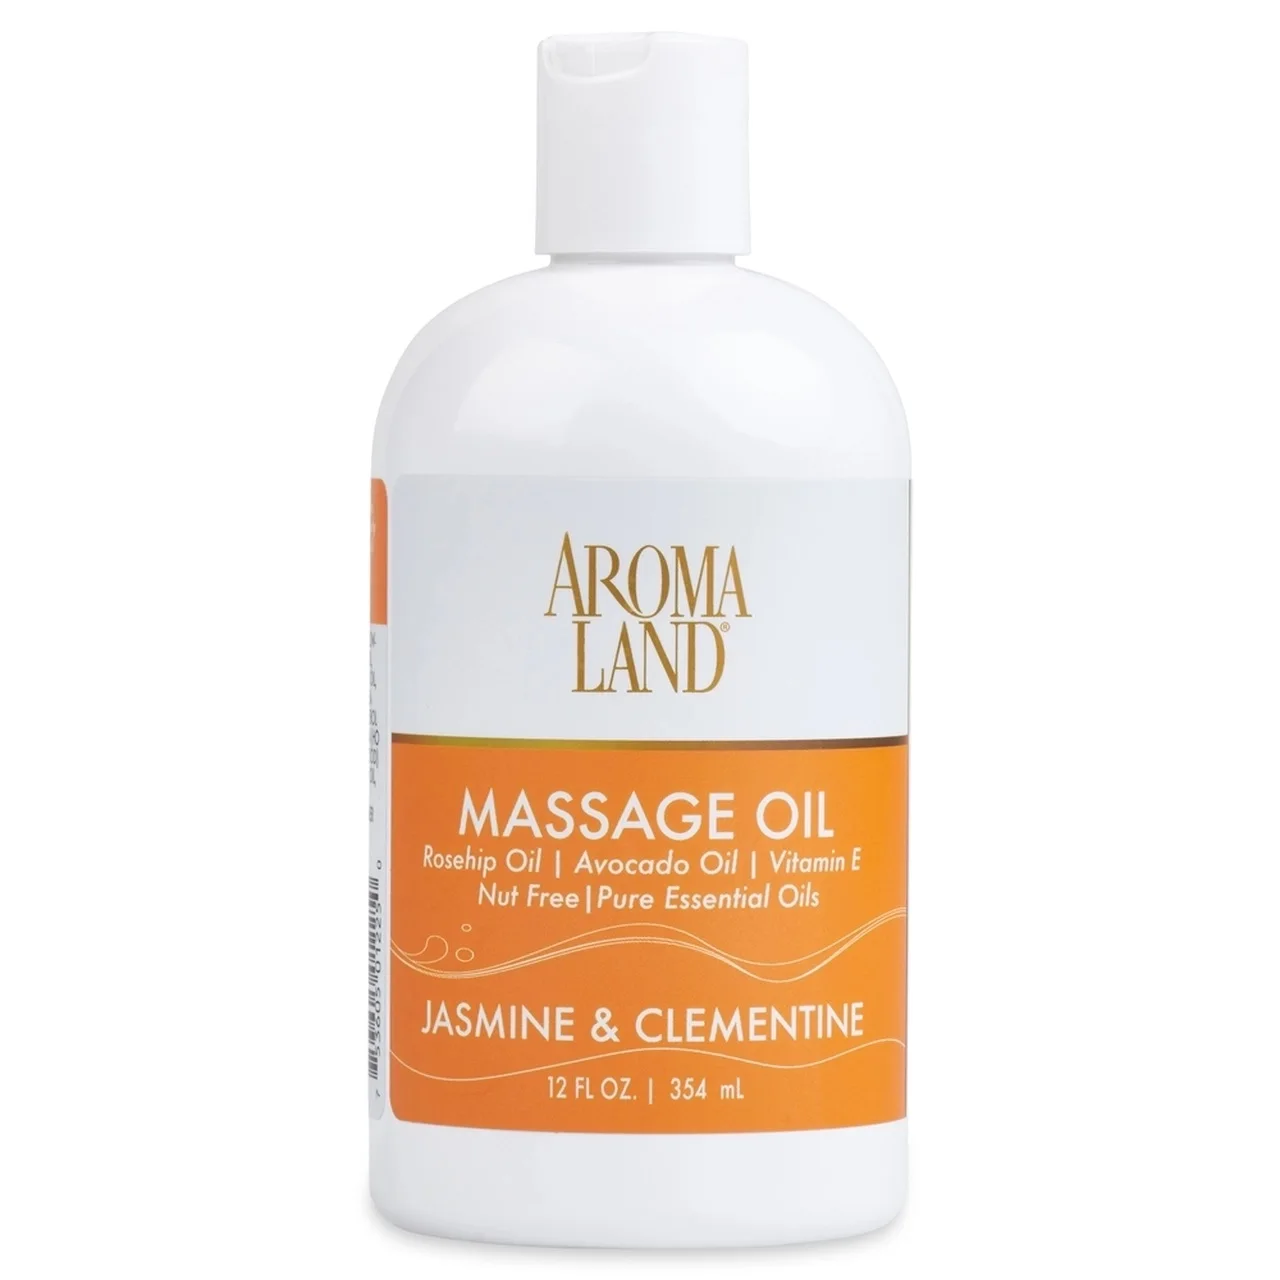 AROMALAND NATURAL MASSAGE & BODY OIL WITH ESSENTIAL OILS - JASMINE & CLEMENTINE 5 GALLON PAIL